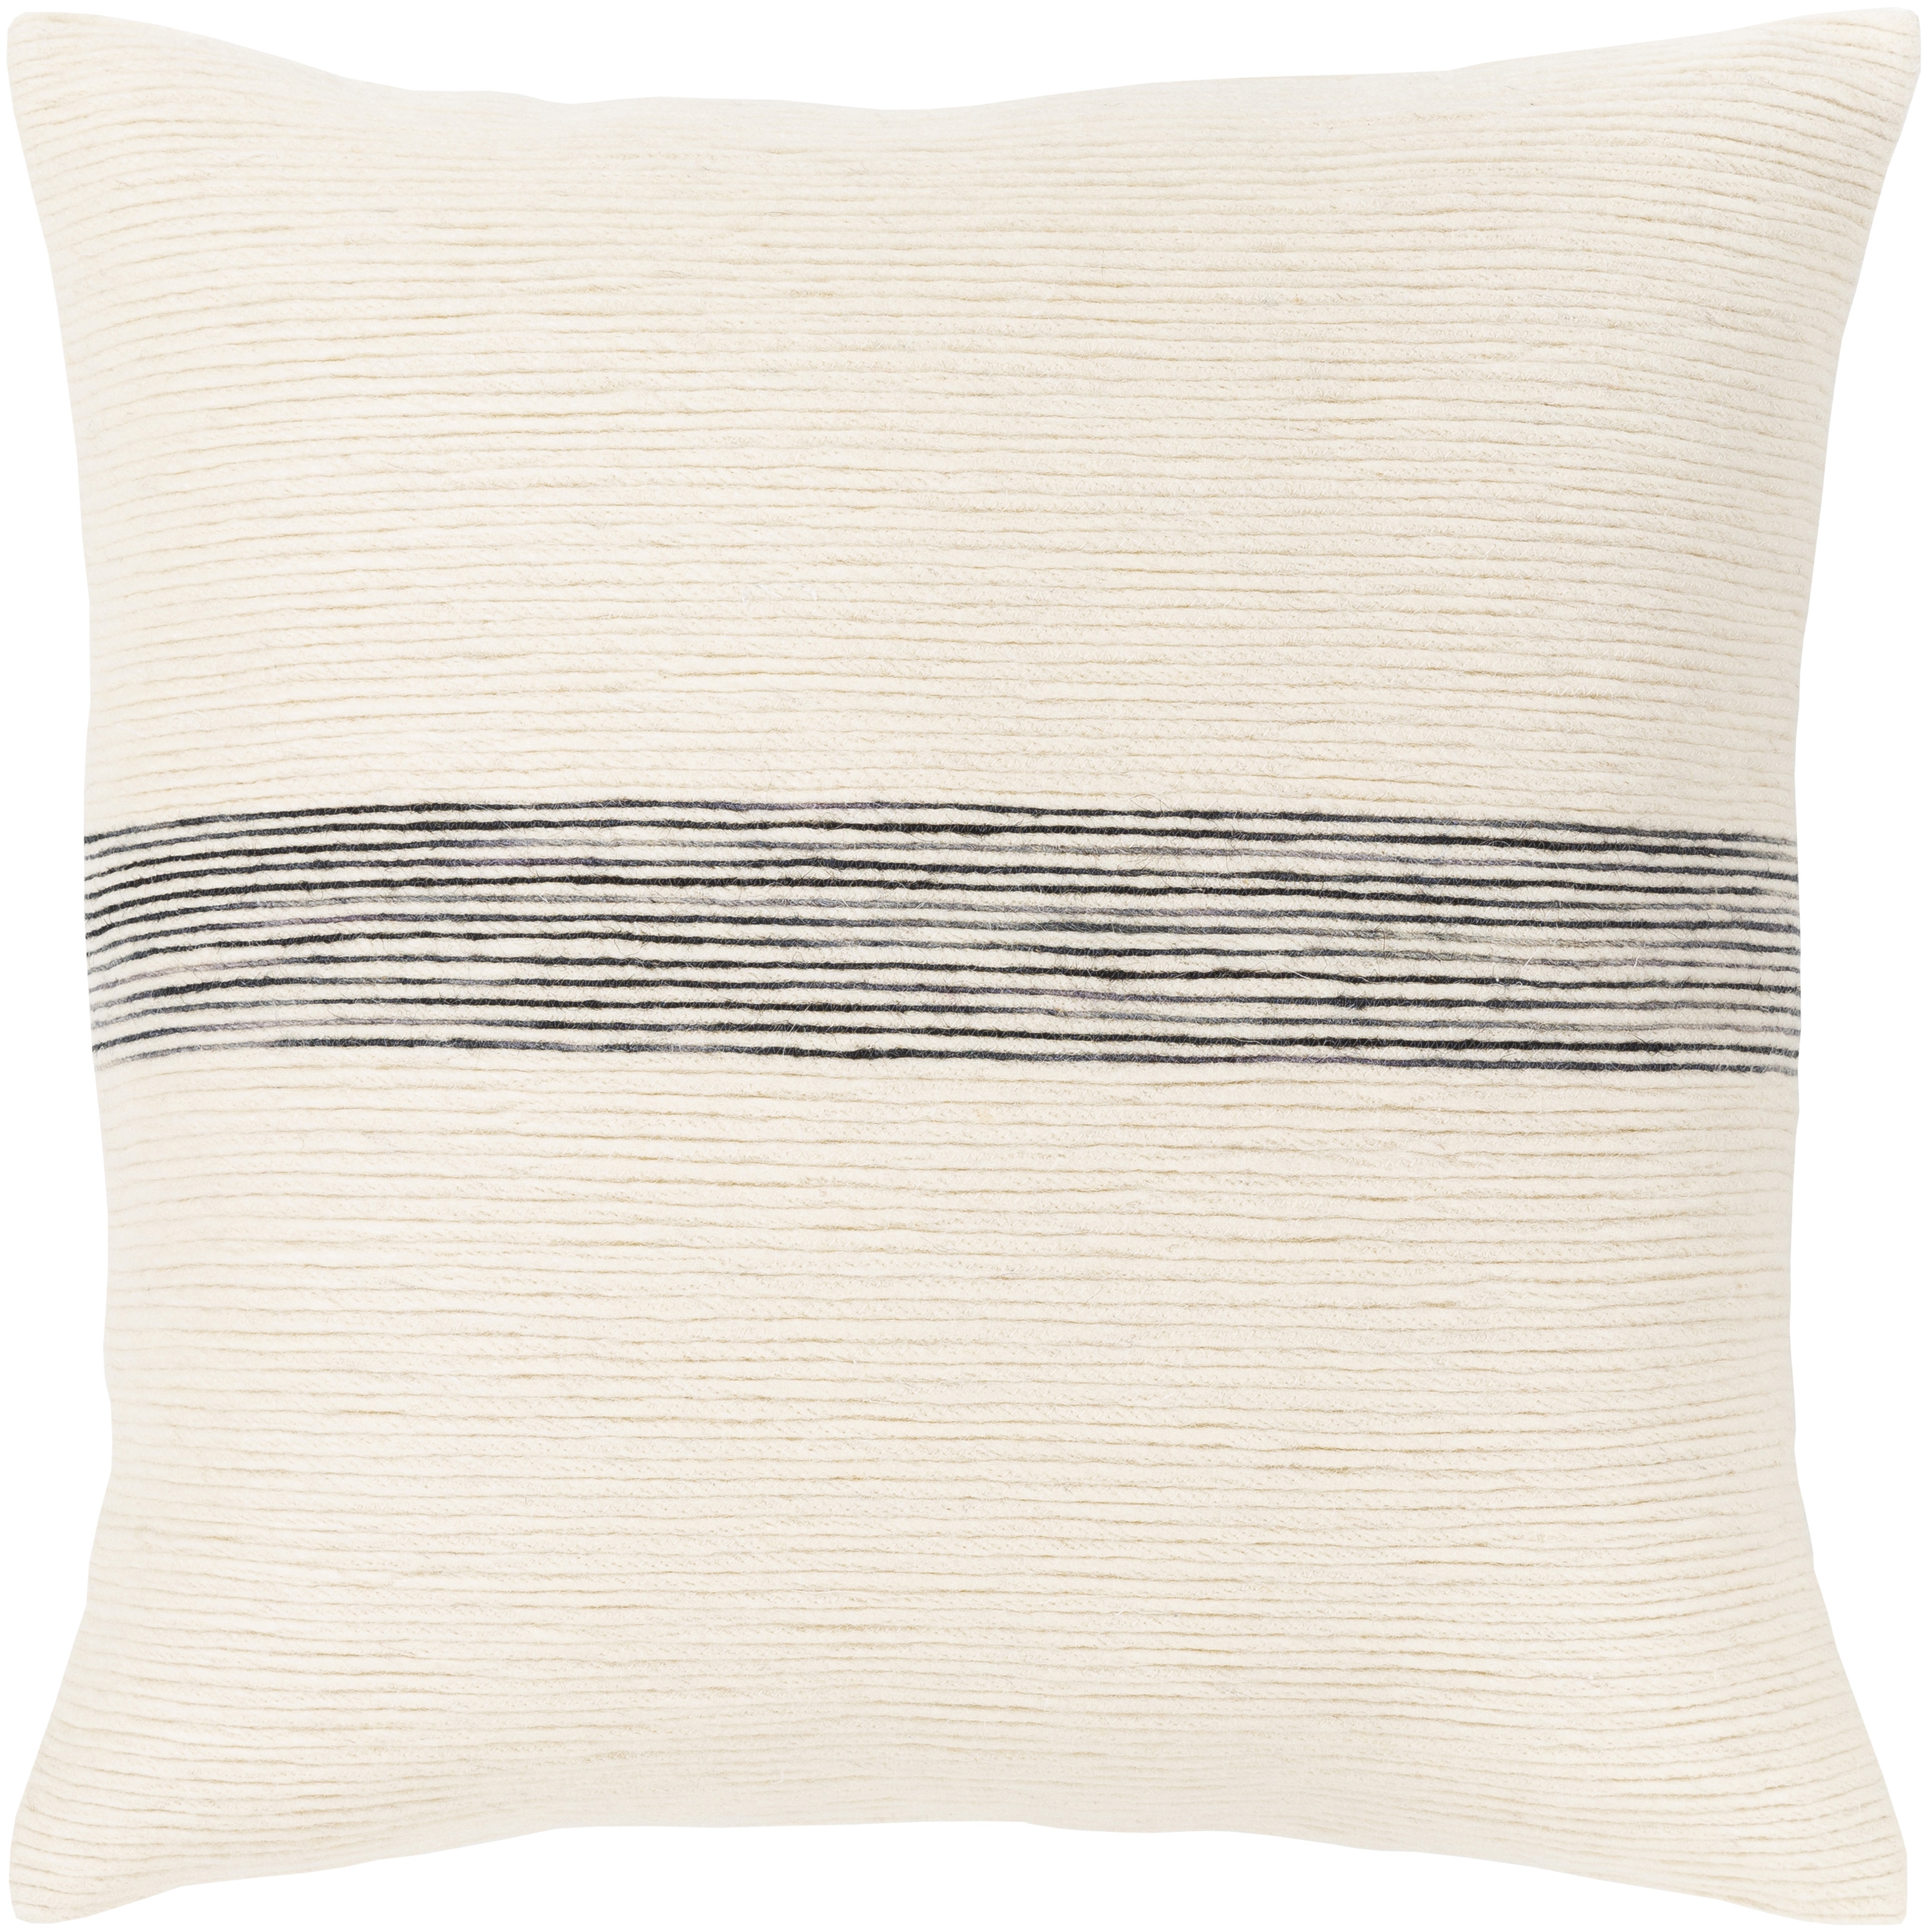 Carine Throw Pillow, 20" x 20", pillow cover only - Image 0